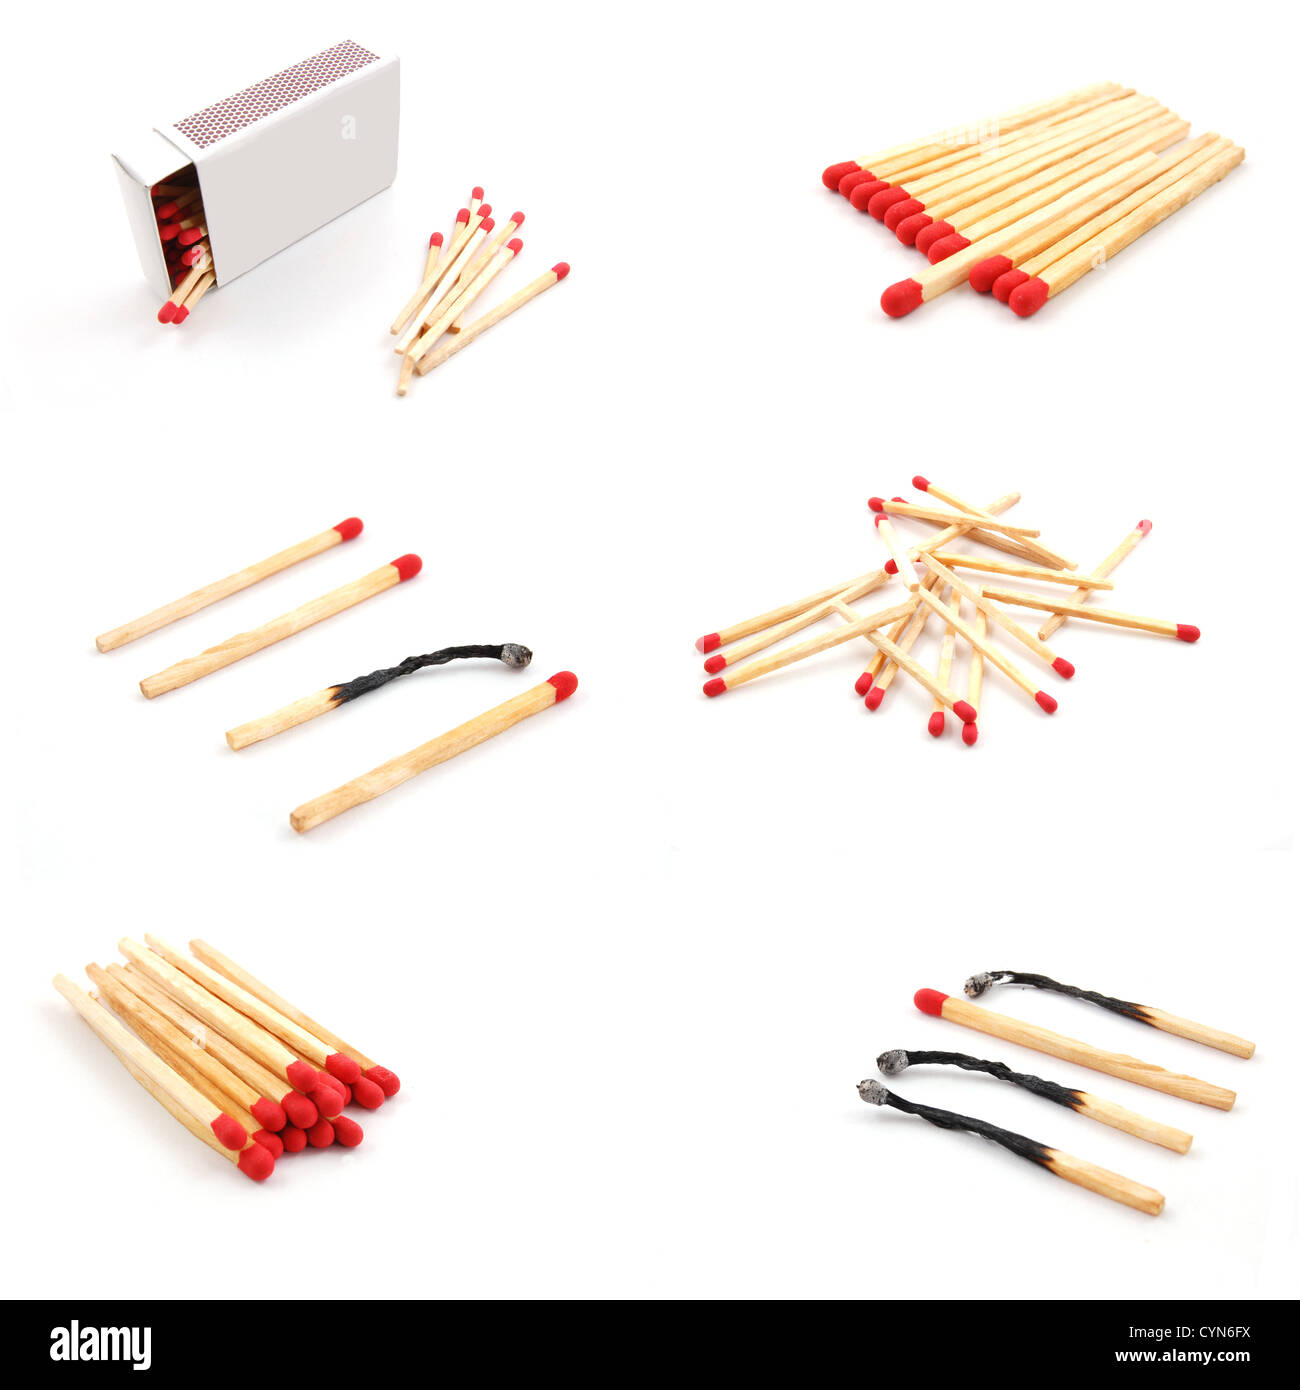 match and matchbox still life collection in white background Stock Photo